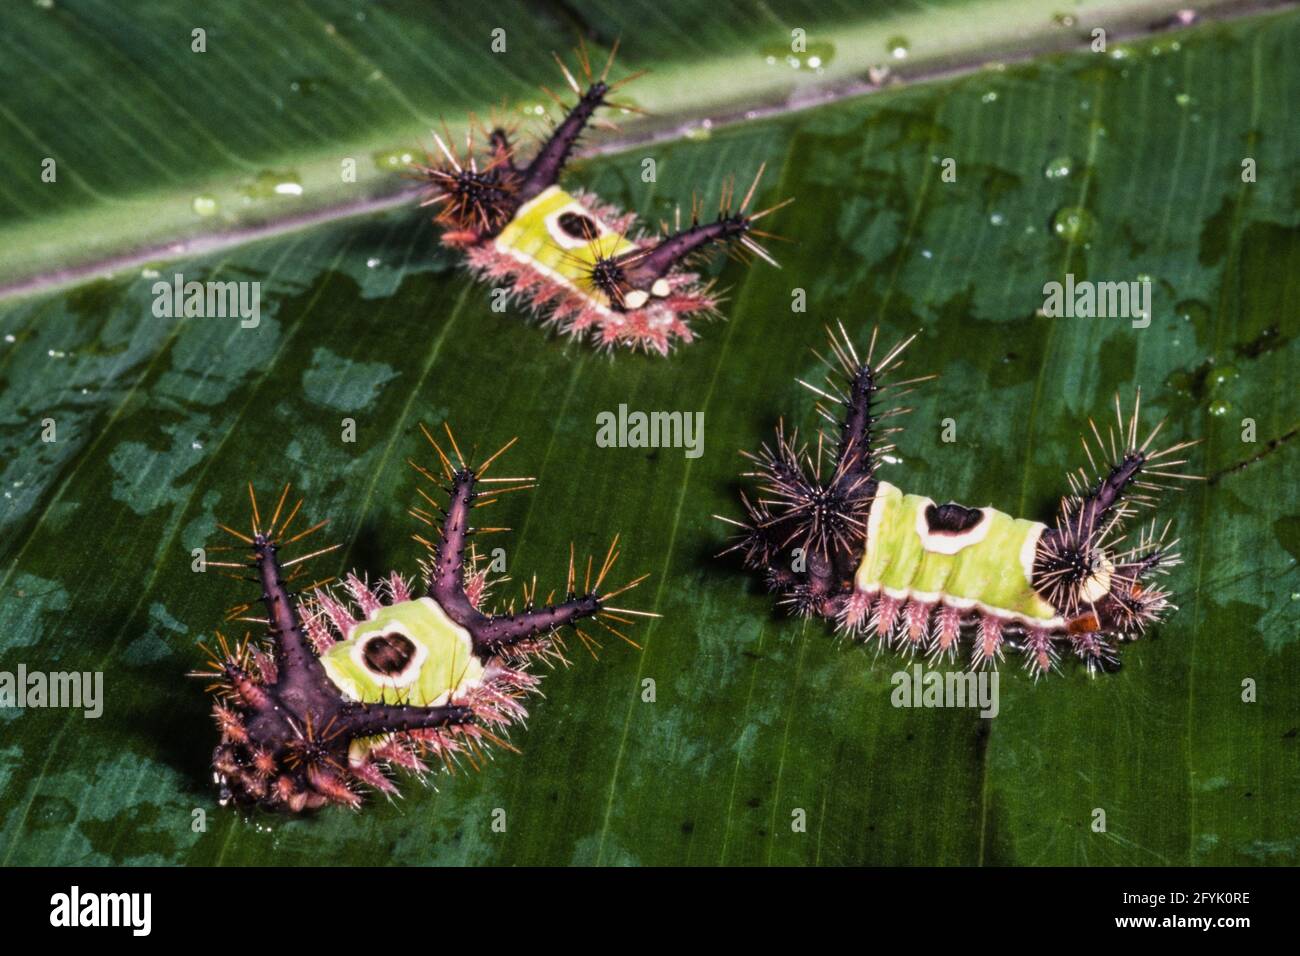 The caterpillars of the Saddleback Caterpillar Moth are venomous with urticating spines that cause a very painful sting. Stock Photo